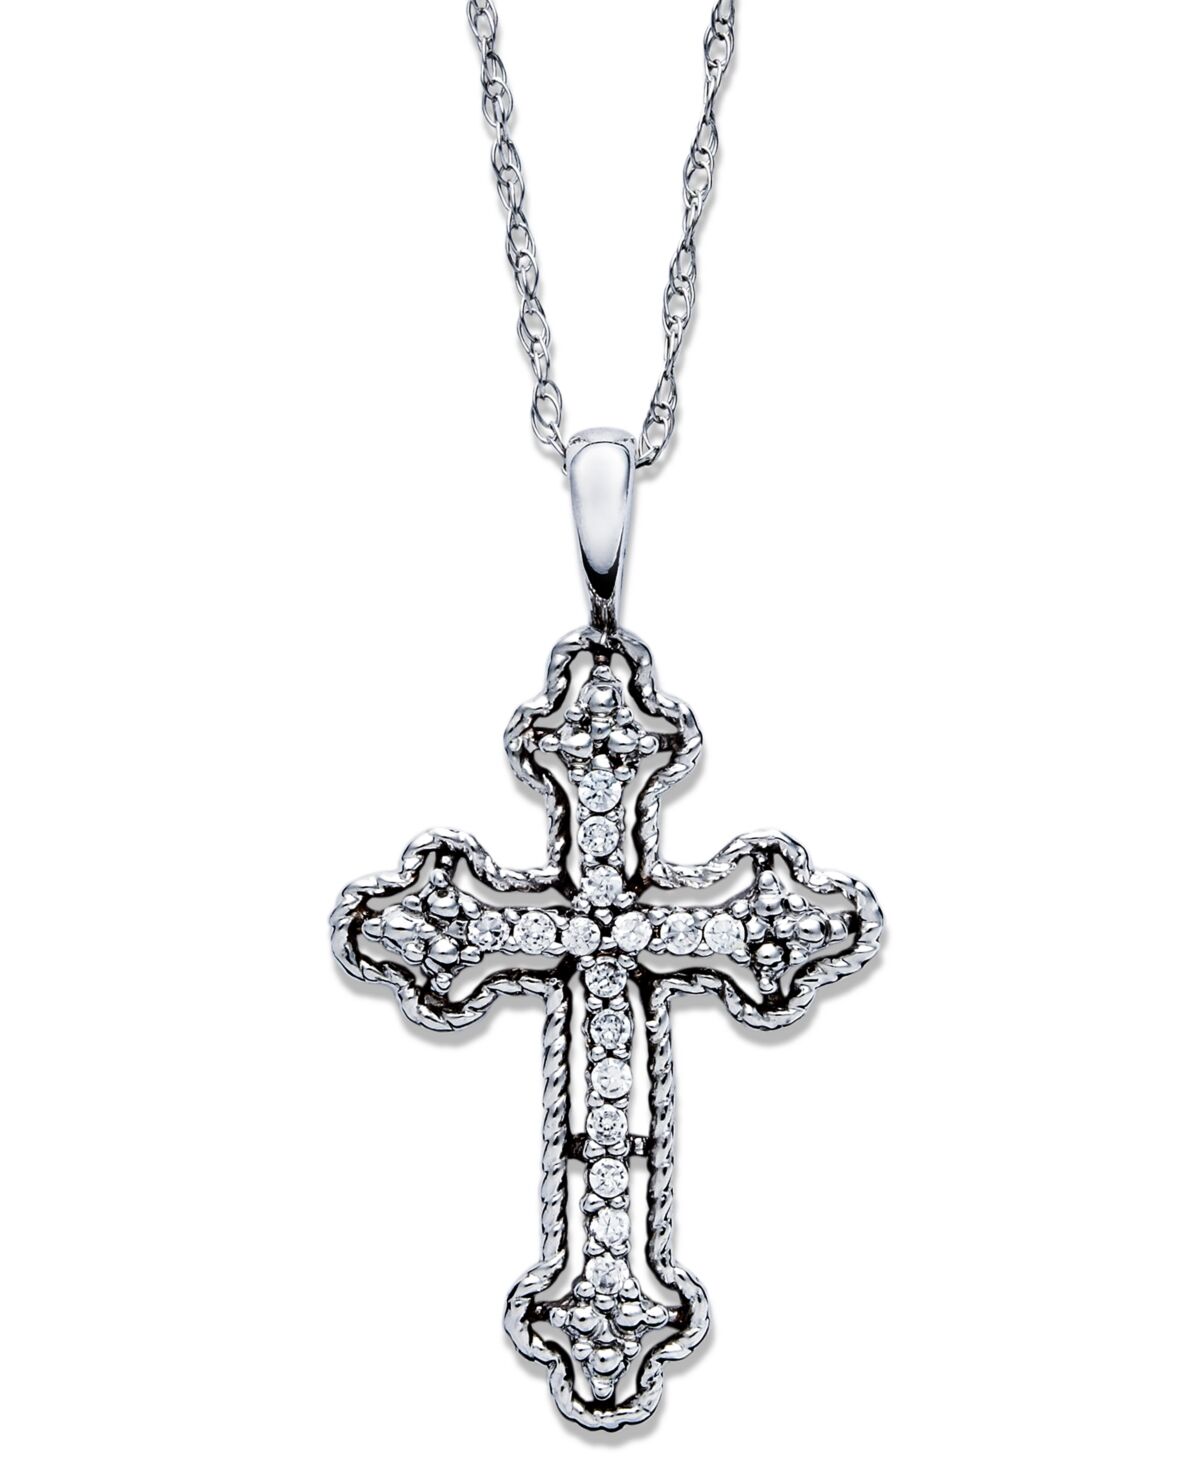 Macy's Diamond Antique Cross Pendant Necklace in 14k White, Yellow, or Rose Gold (1/10 ct. t.w) - White Gold